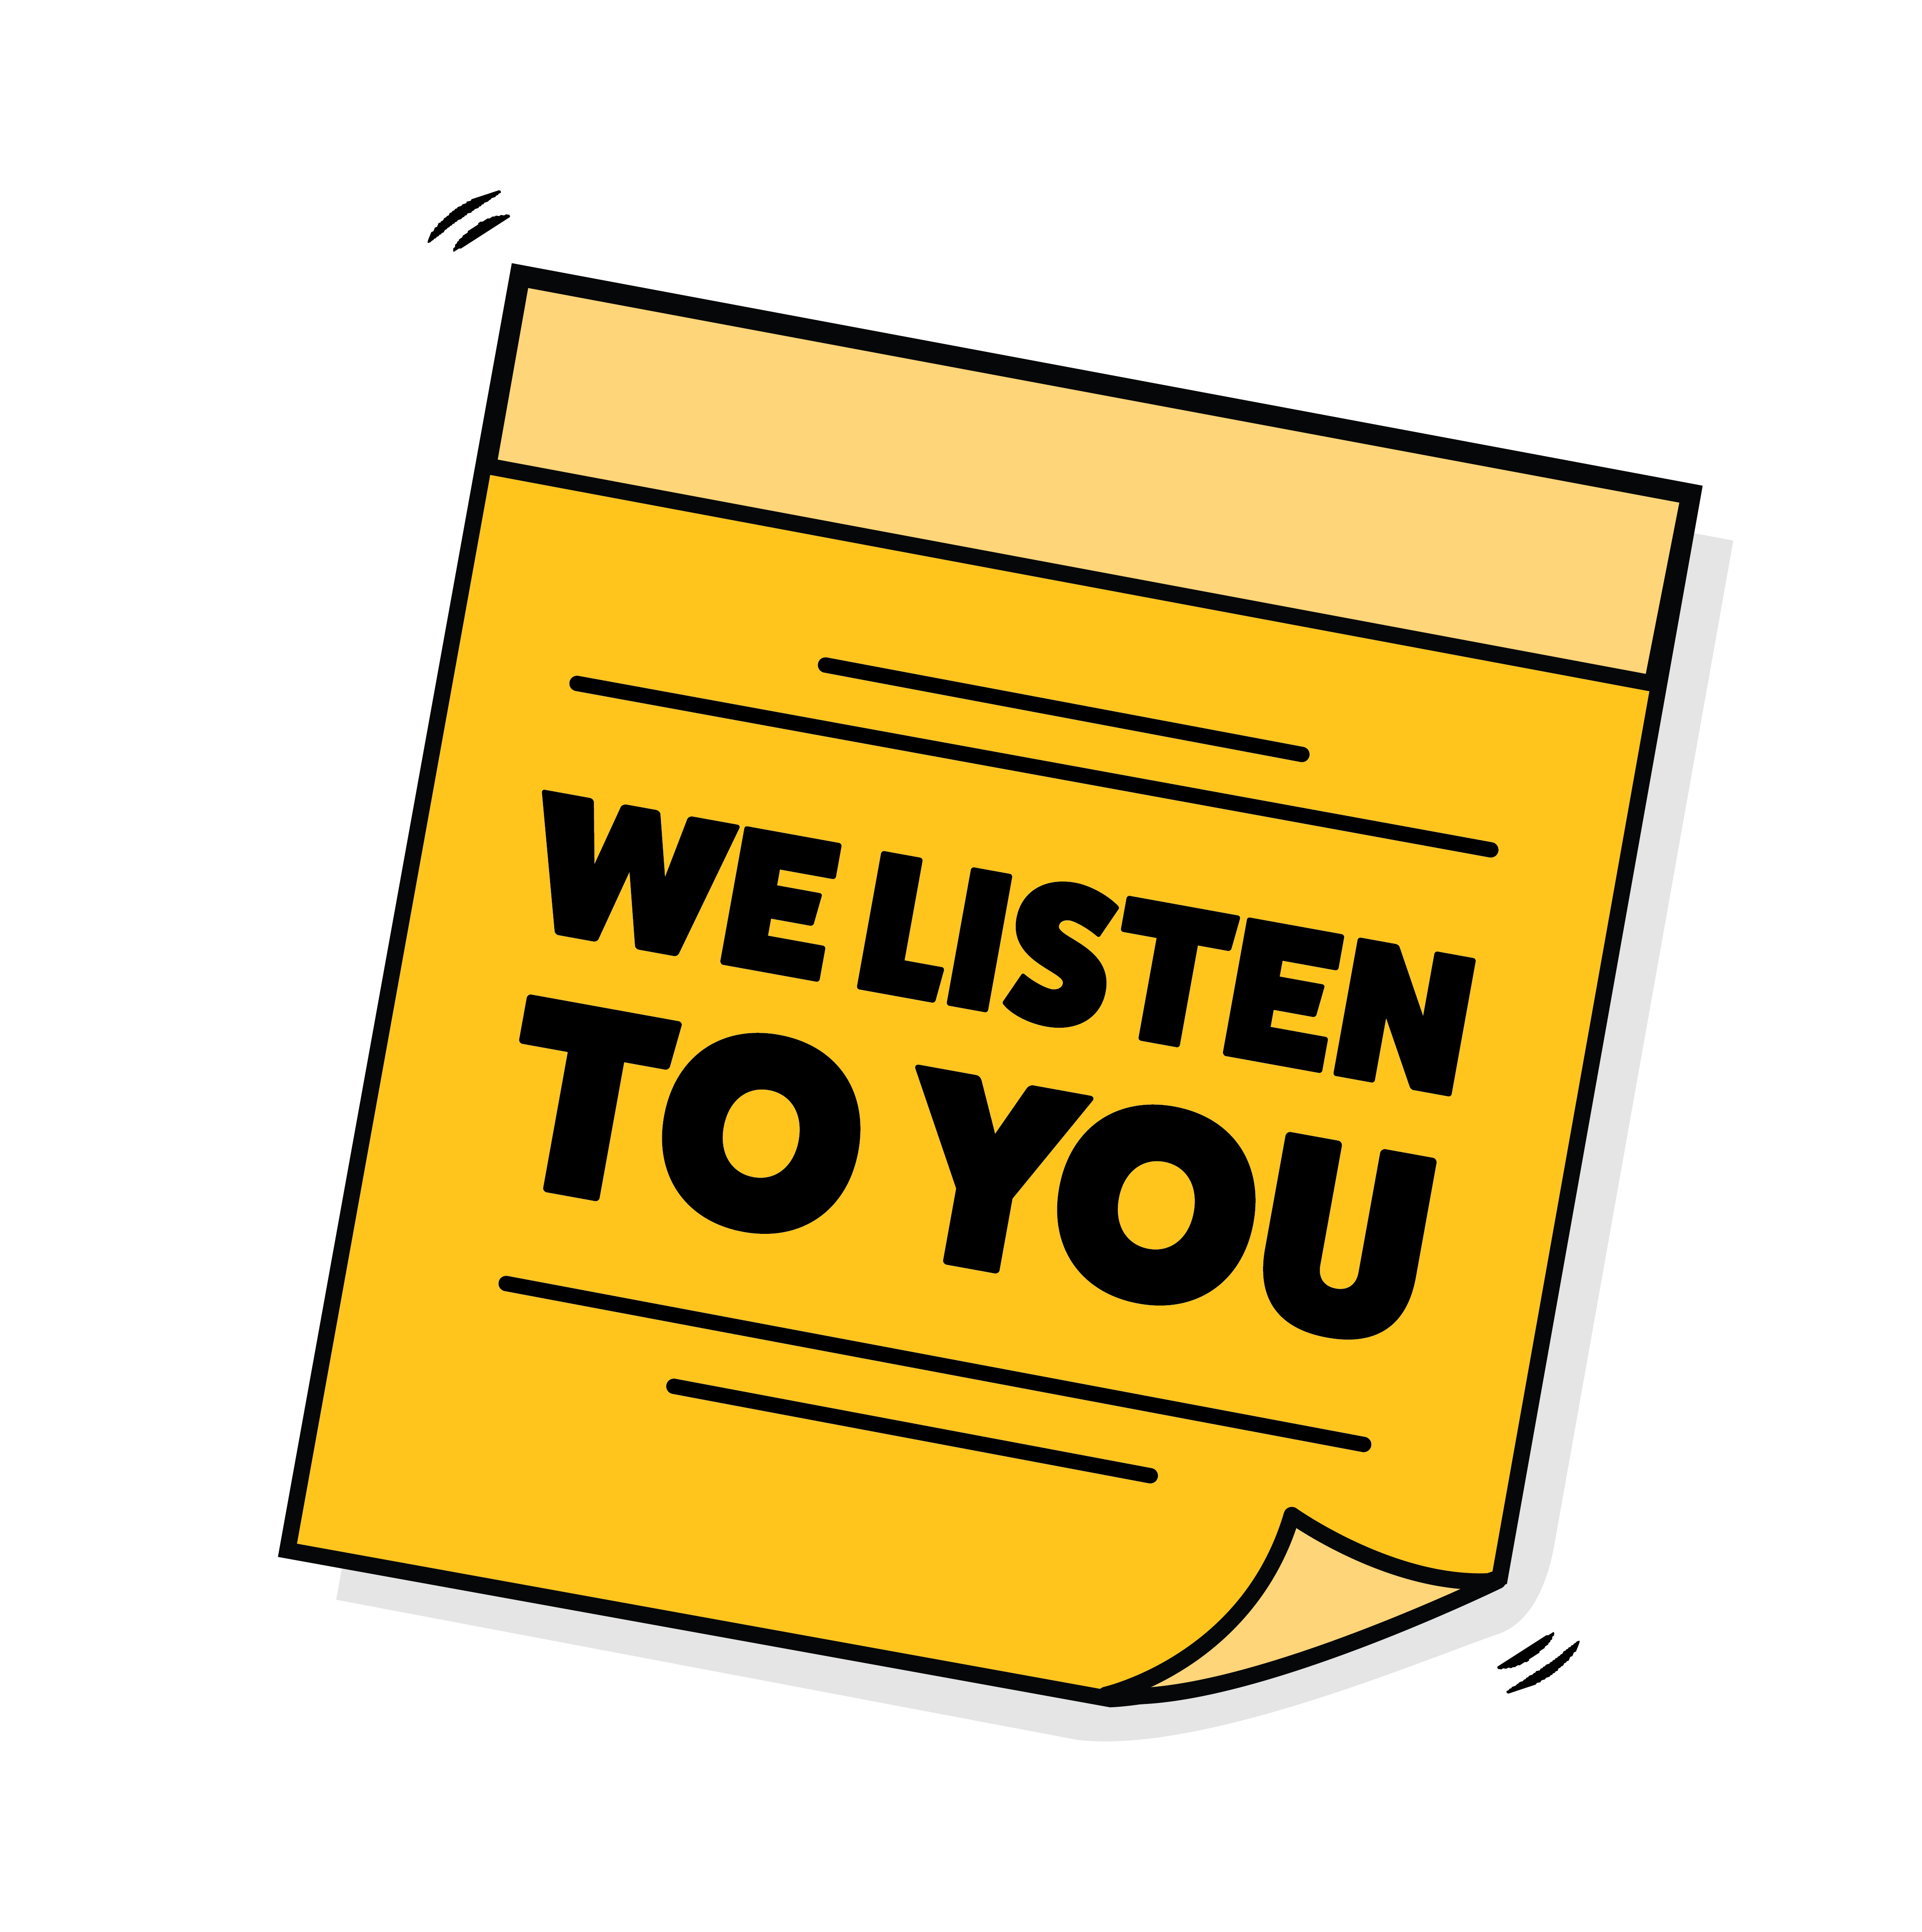 Image with 'We listen to you' text